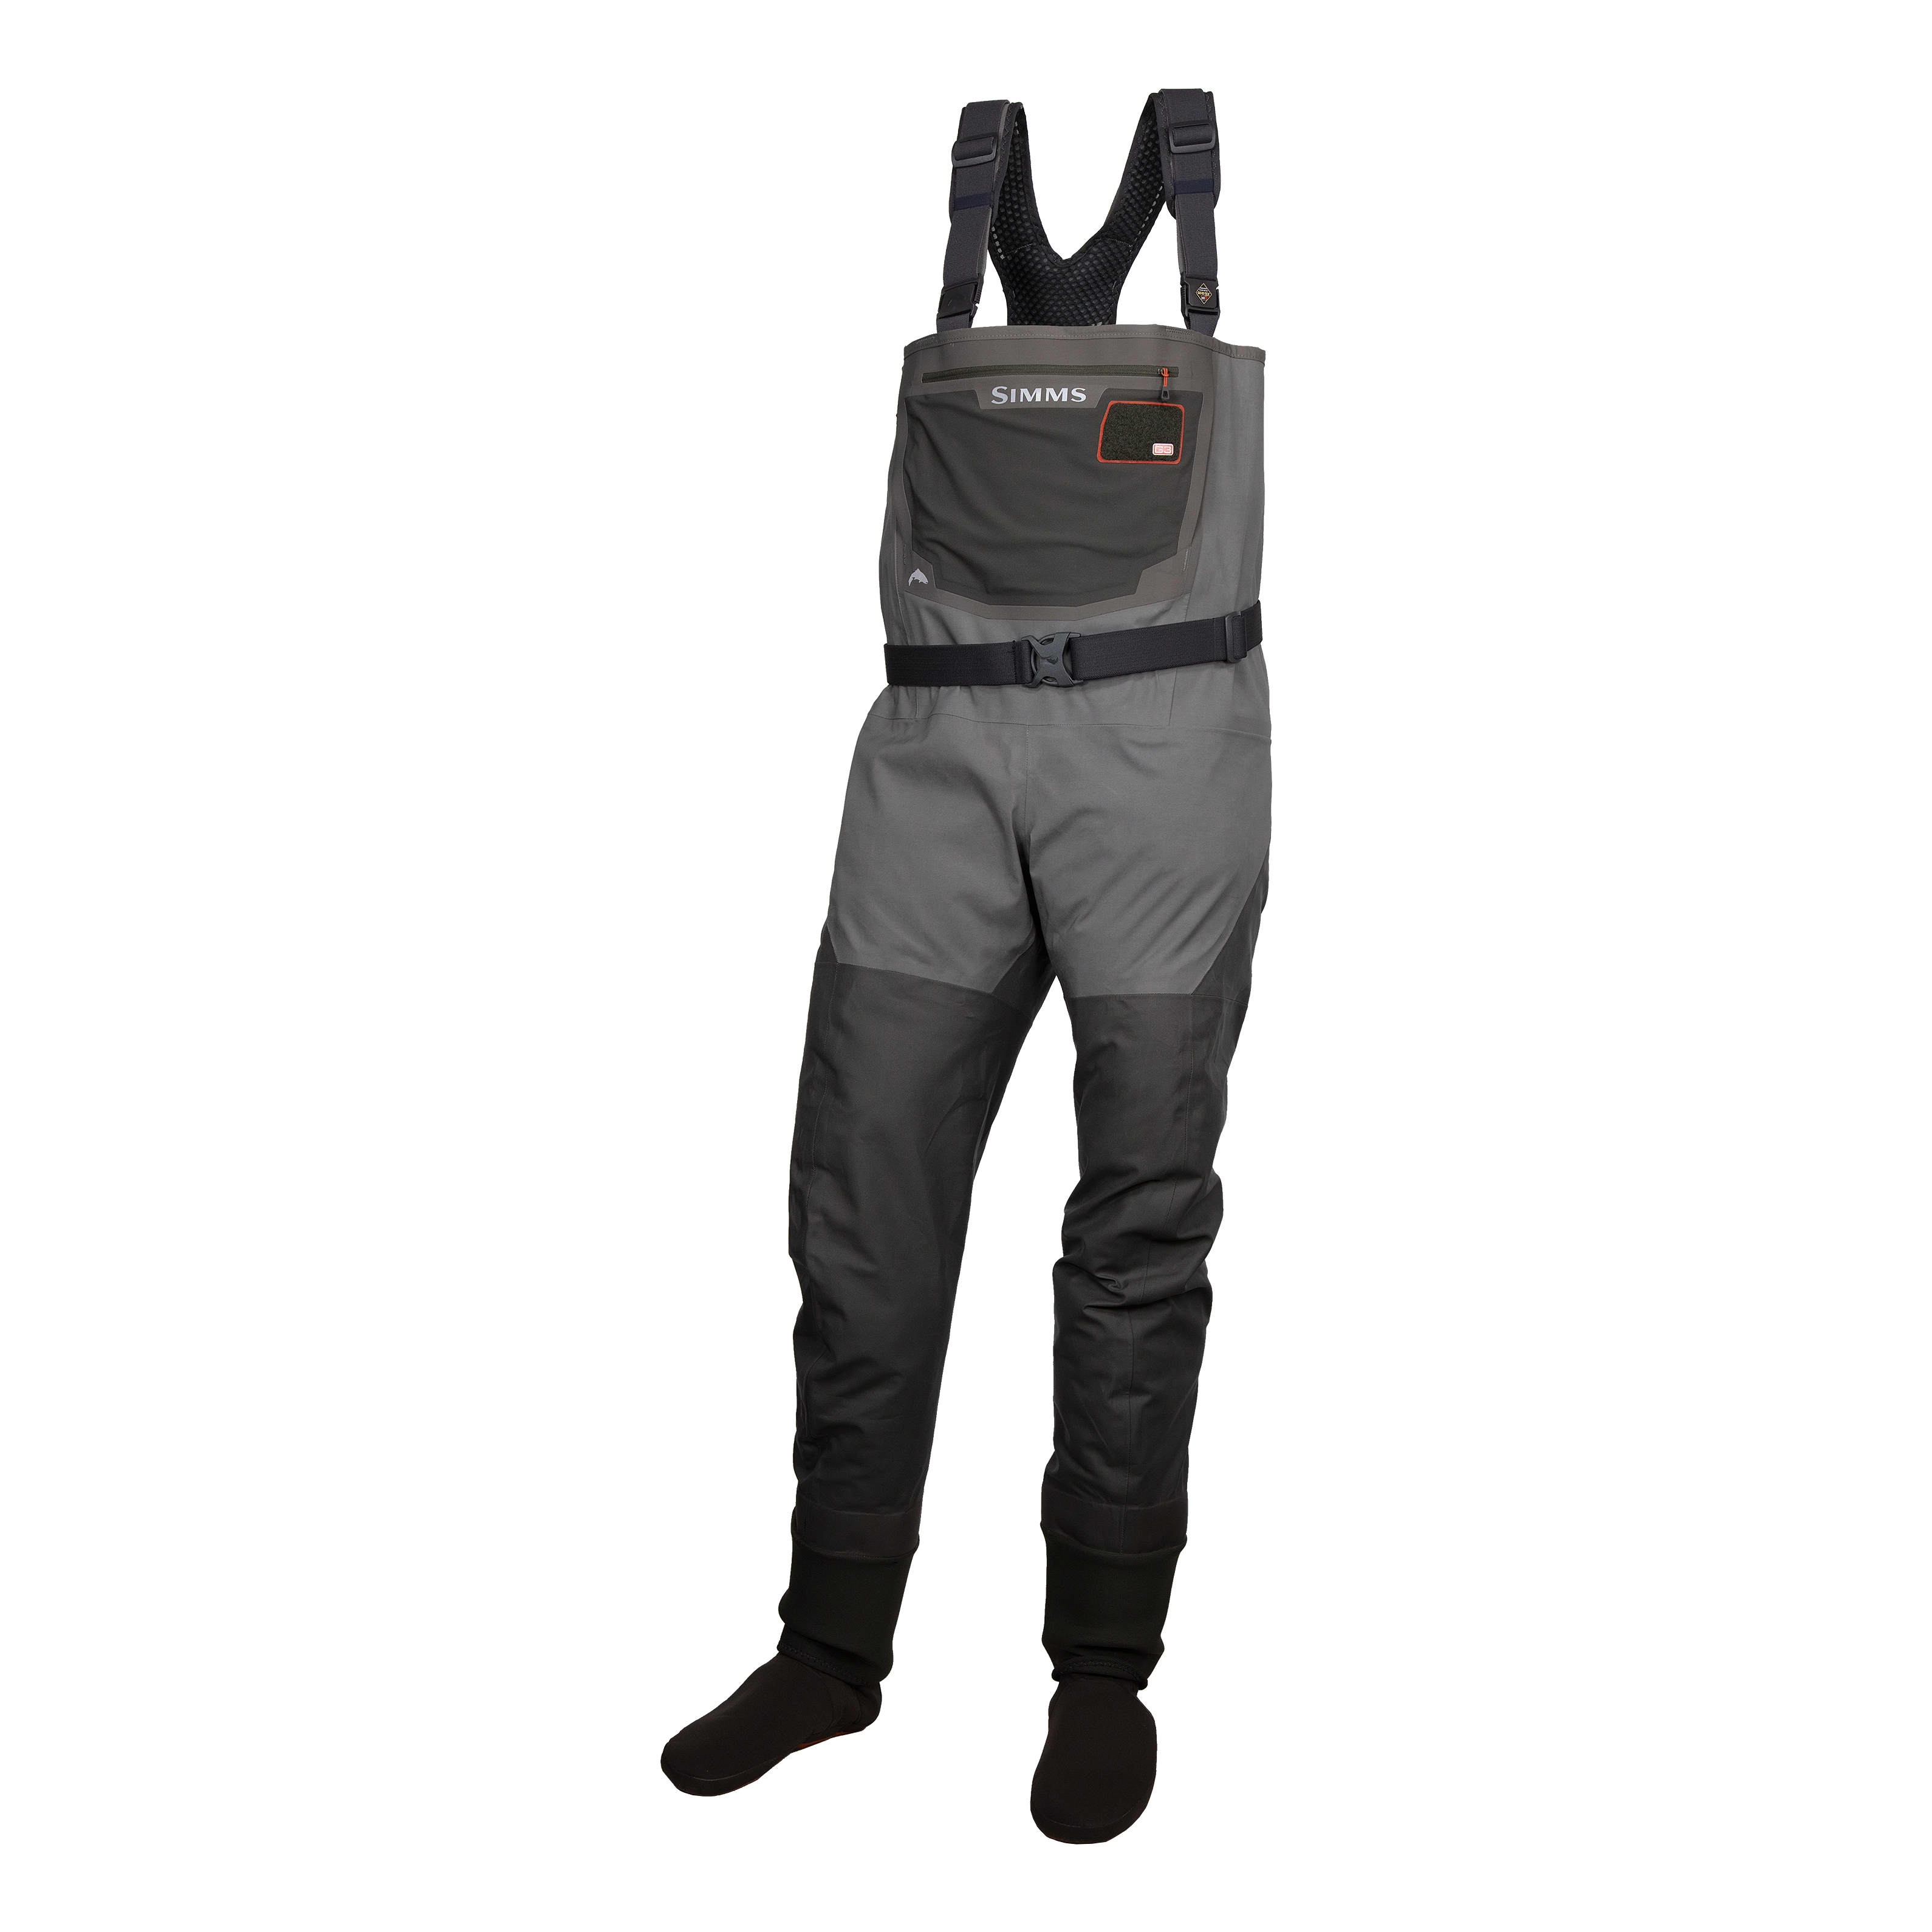 Cabela's® Premium Breathable Stockingfoot Waders with 4MOST DRY